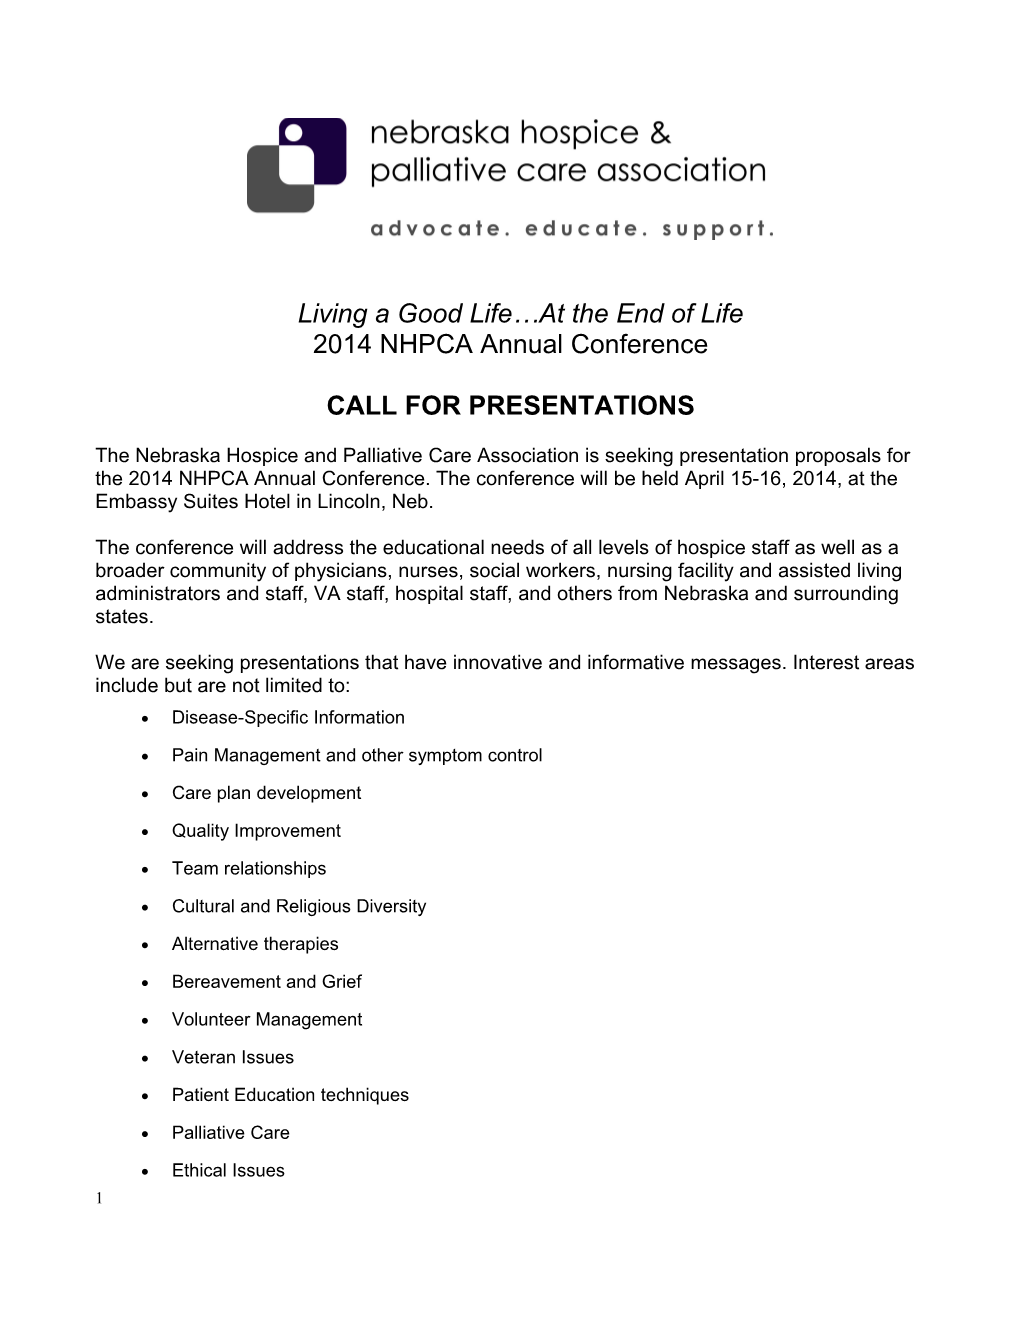 Attention: Call for Presentations